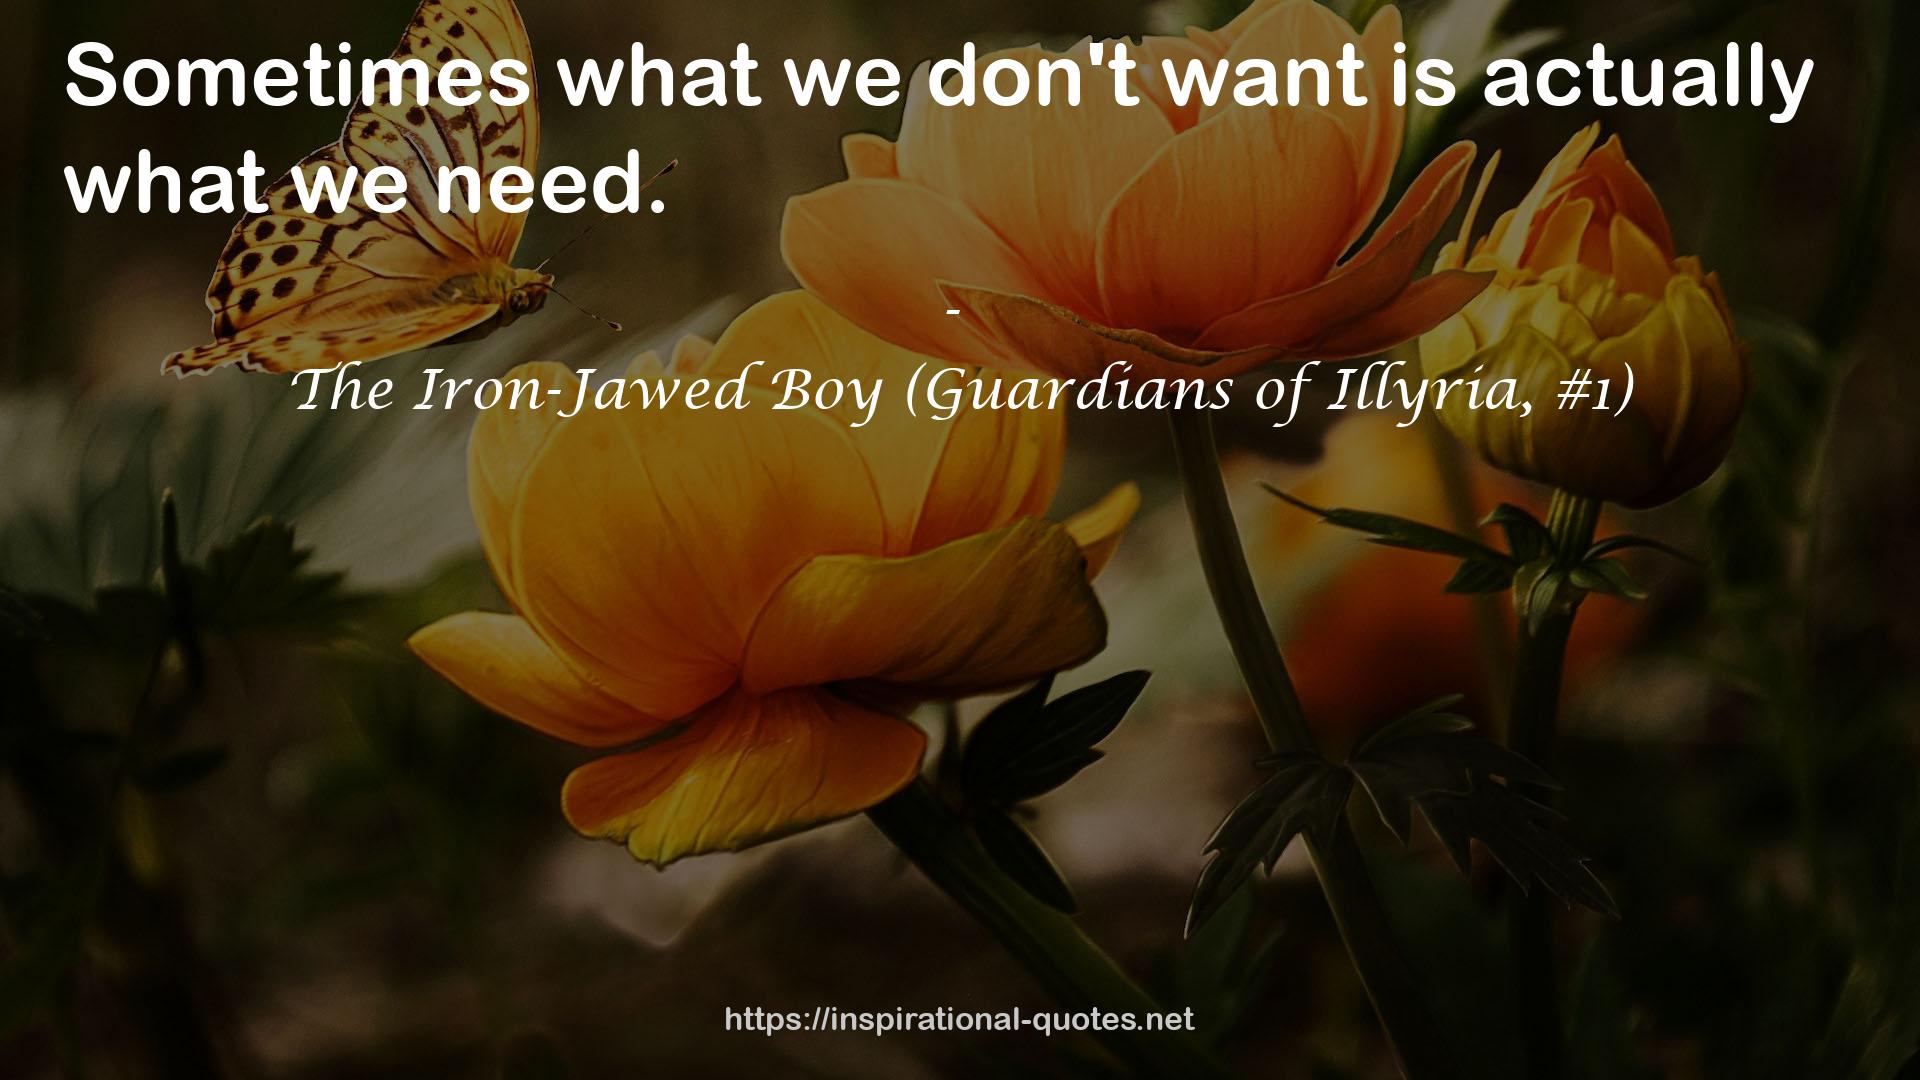 The Iron-Jawed Boy (Guardians of Illyria, #1) QUOTES